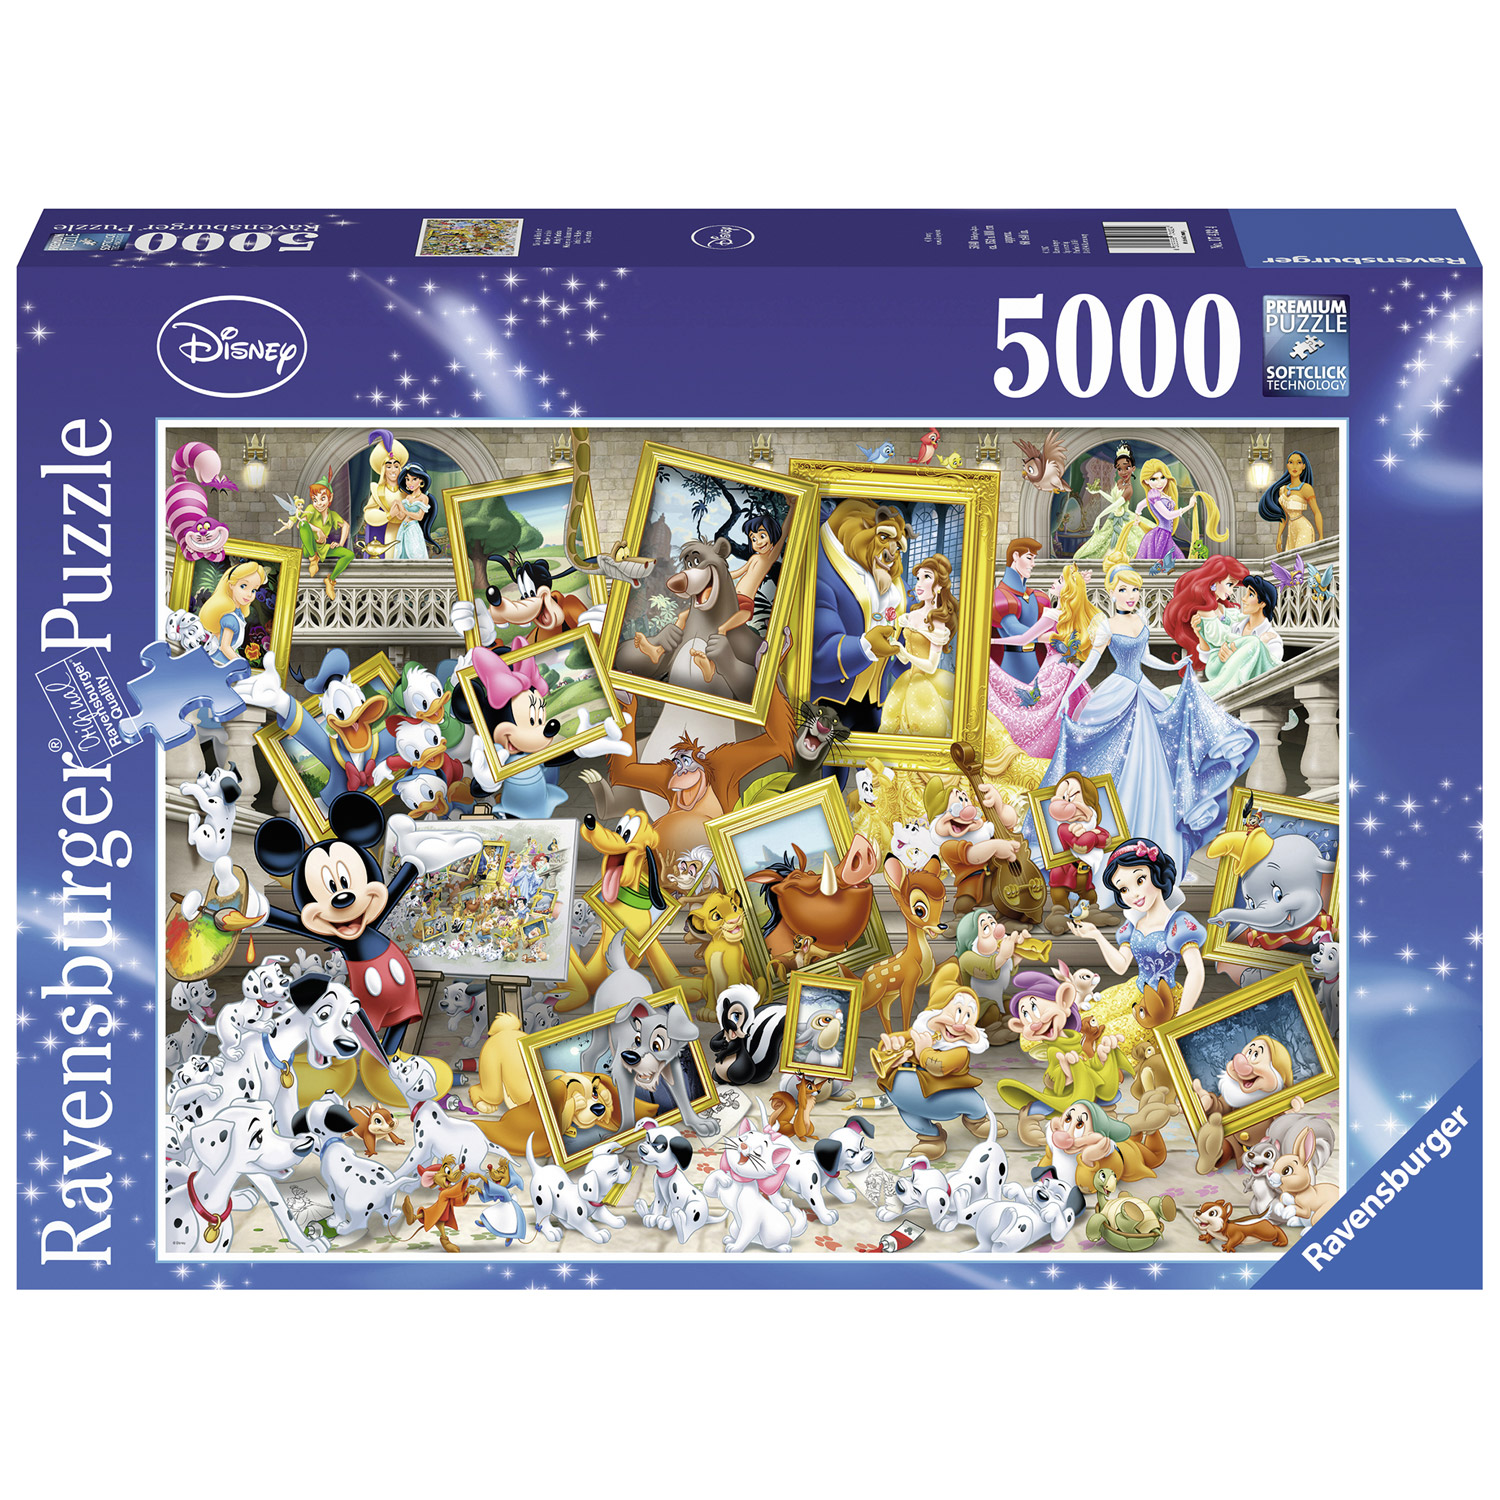 Jigsaw Puzzle for Adults Snow House-5000piece Jigsaw Puzzles Puzzles for Adults Challenging and Fun for Adults Teens and Kids